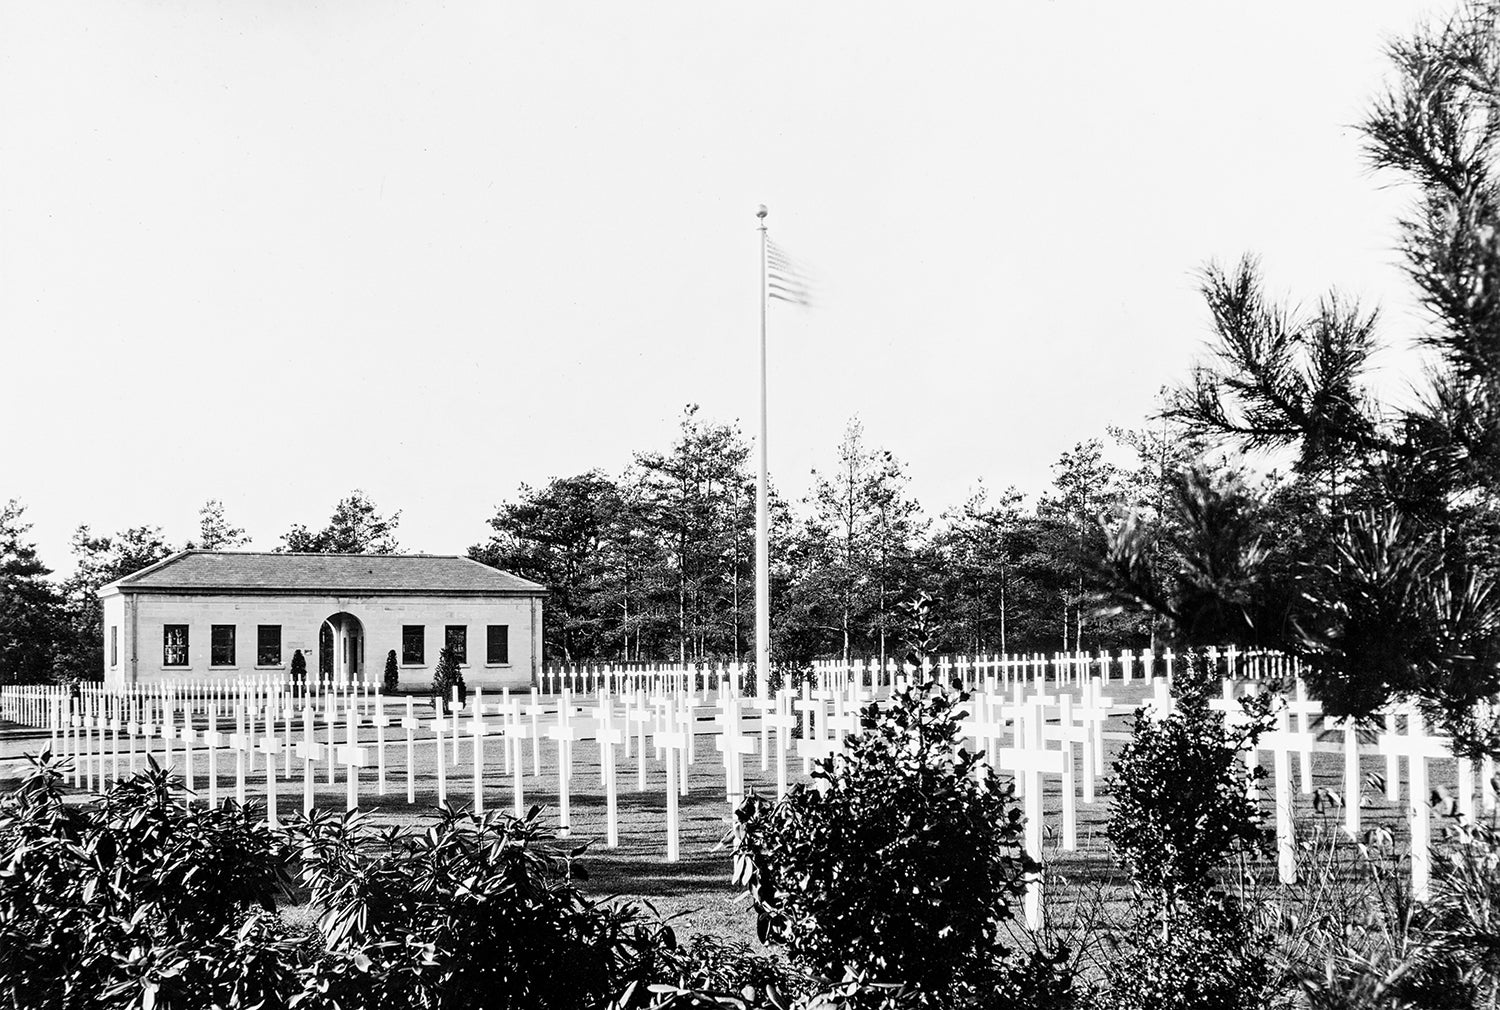 Brookwood American Cemetery, England, circa 1925. (Credit: National Archives)